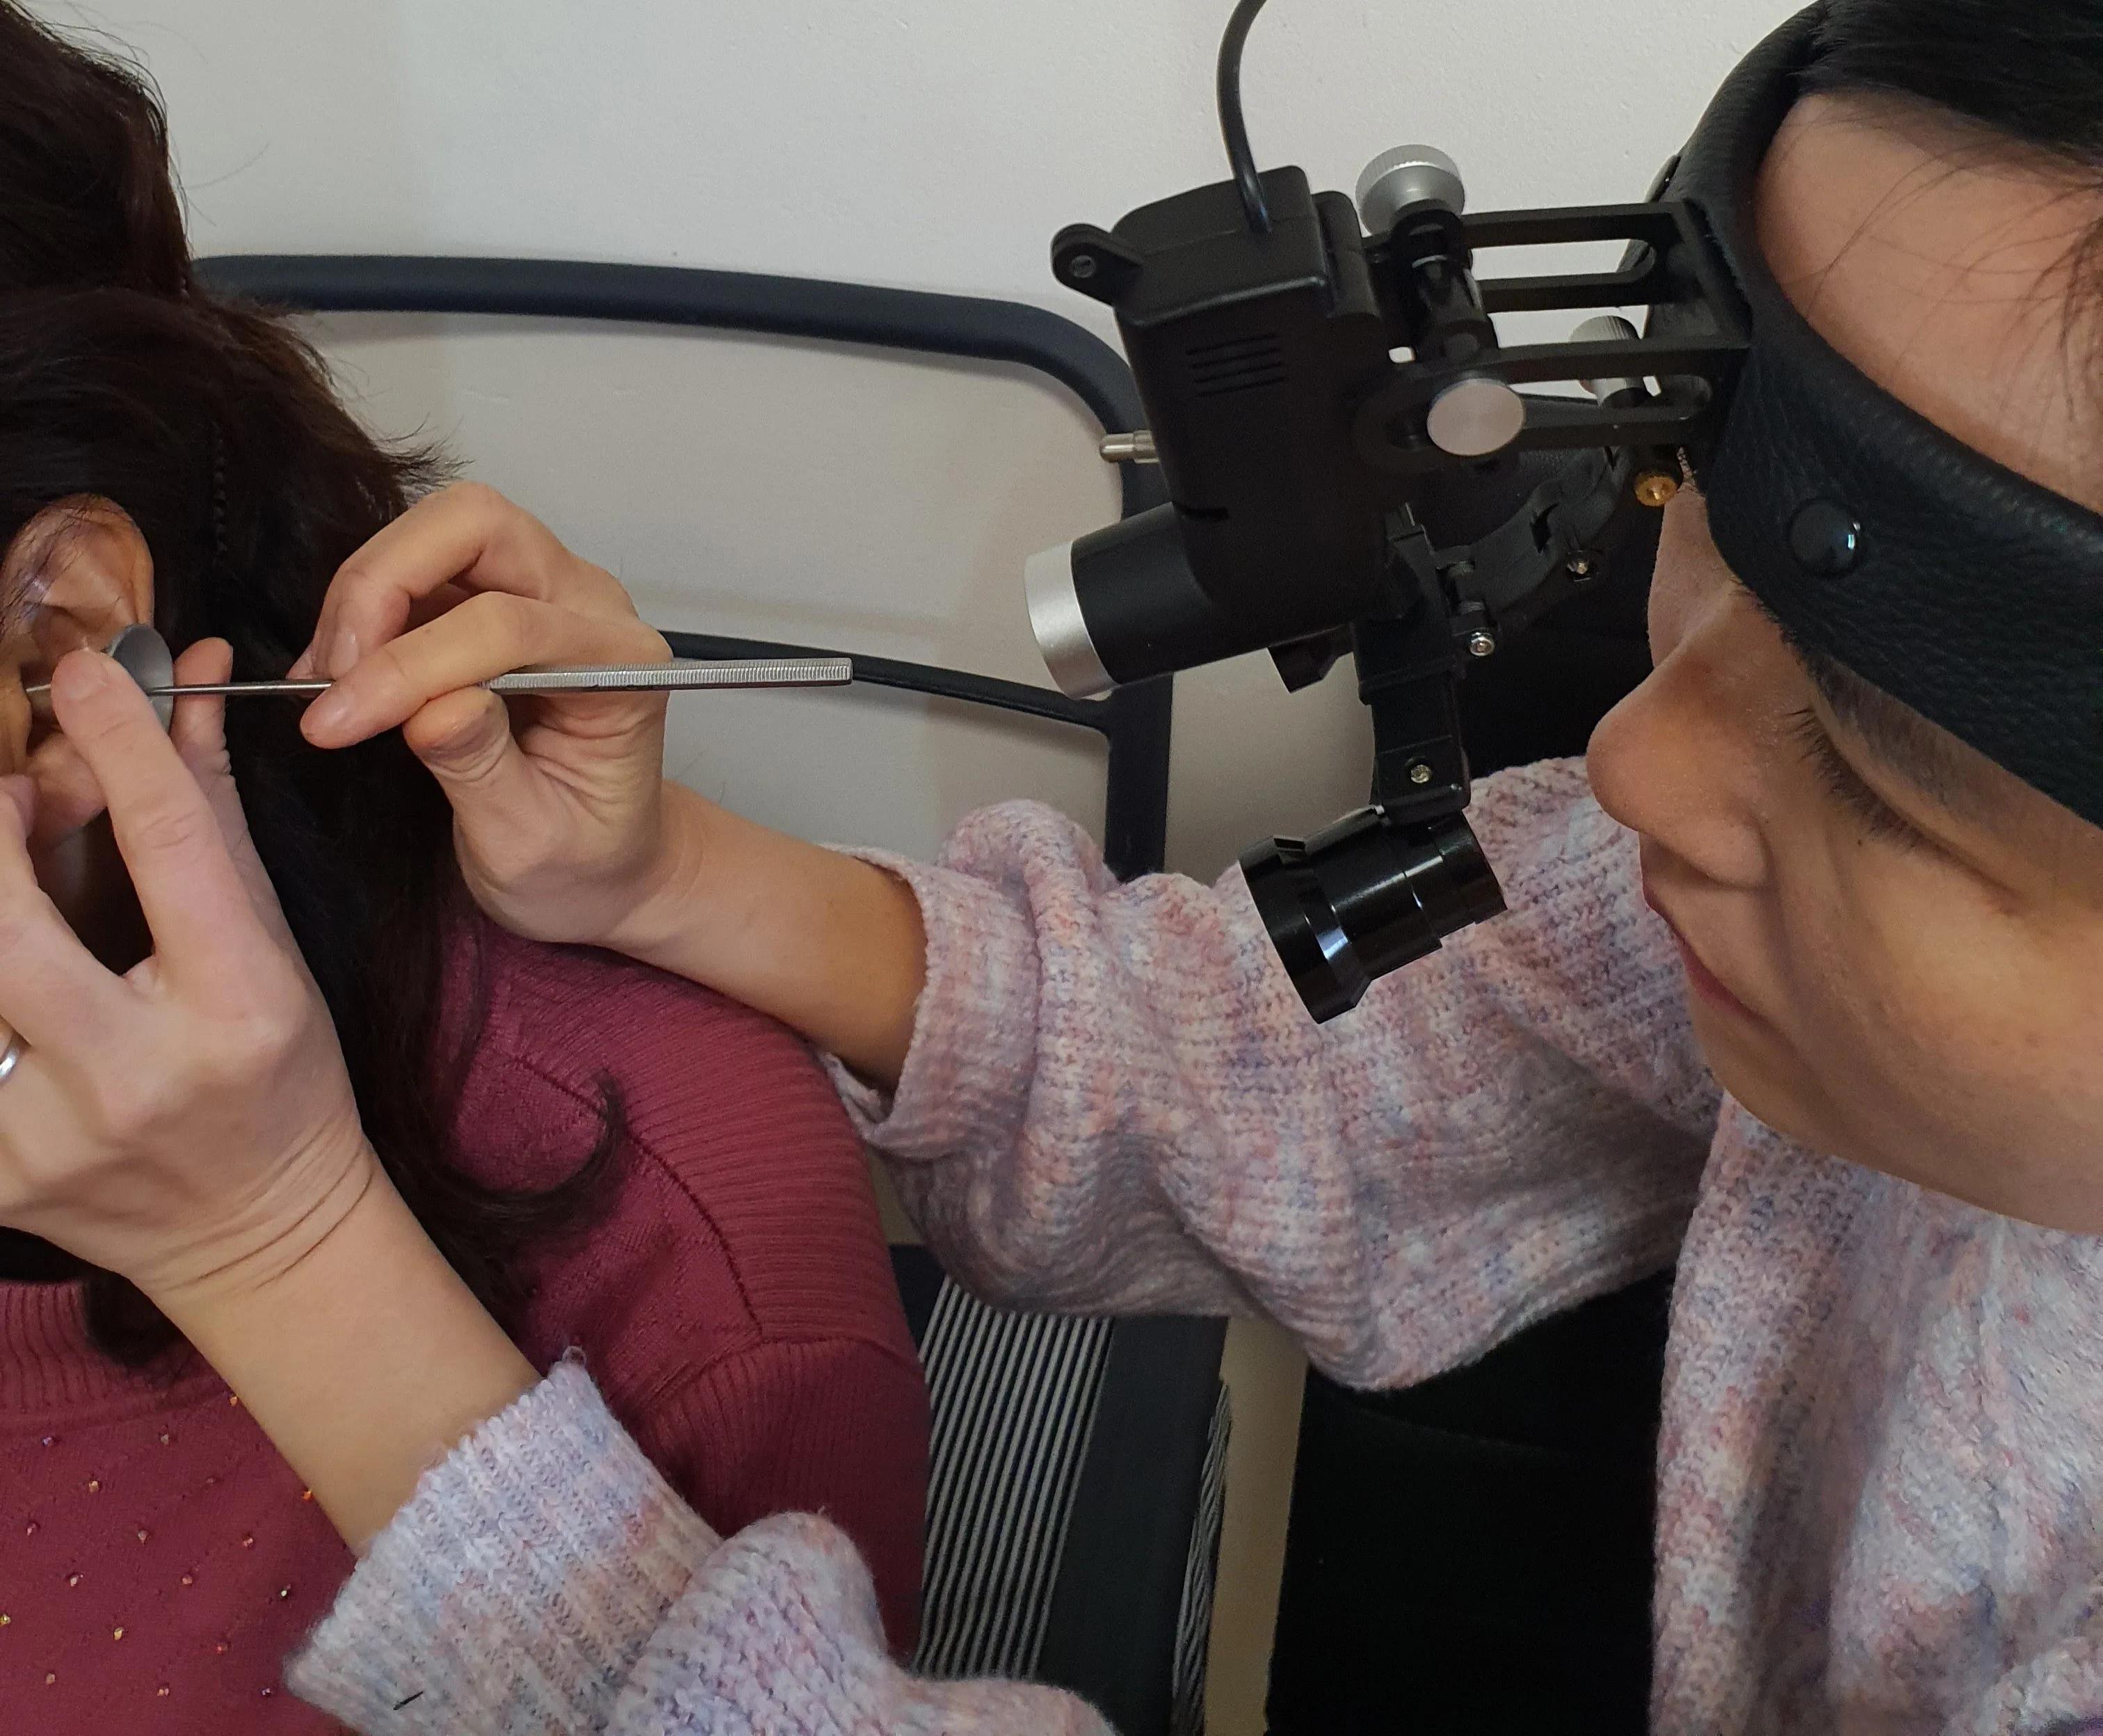 Mobile Ear wax Removal for Adults by St George audiologist, Melody Cao using micro-suction and other techniques 